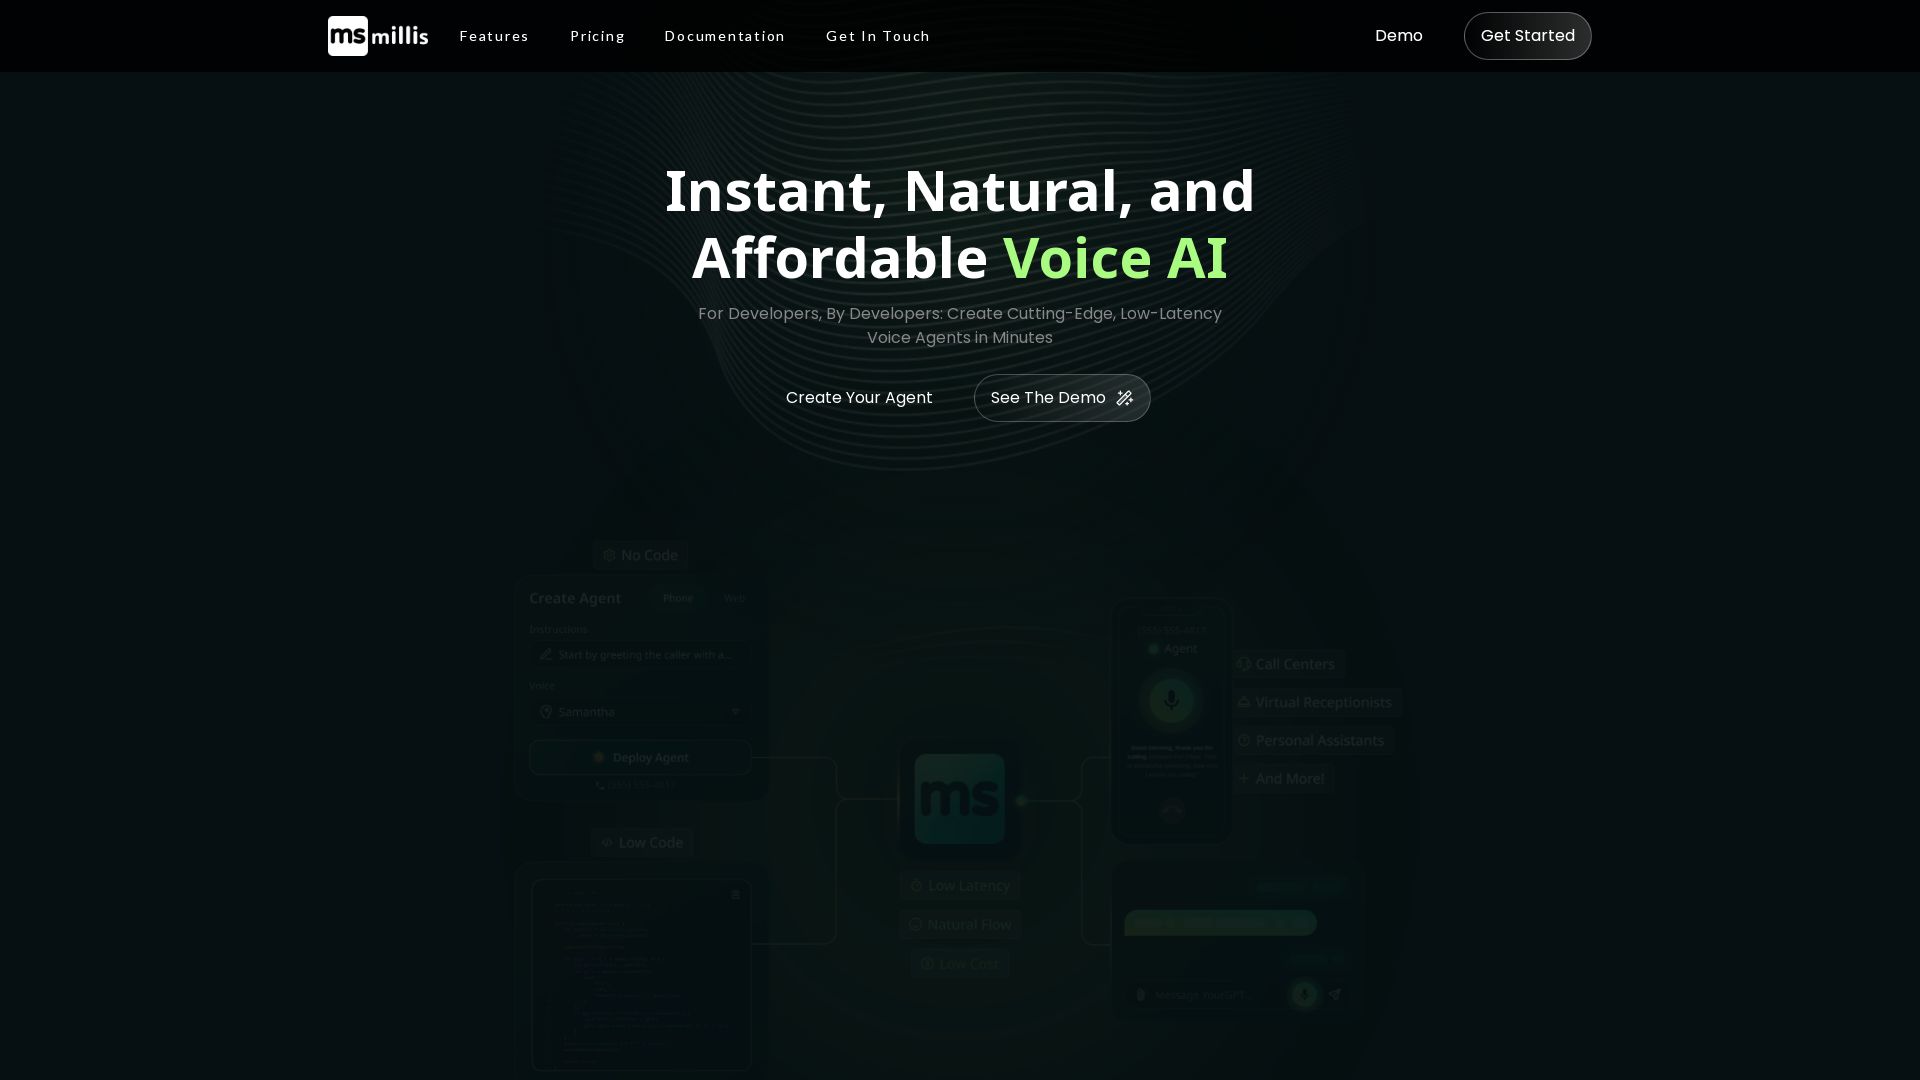 Millis AI - Instant, Natural, and Affordable Voice AI